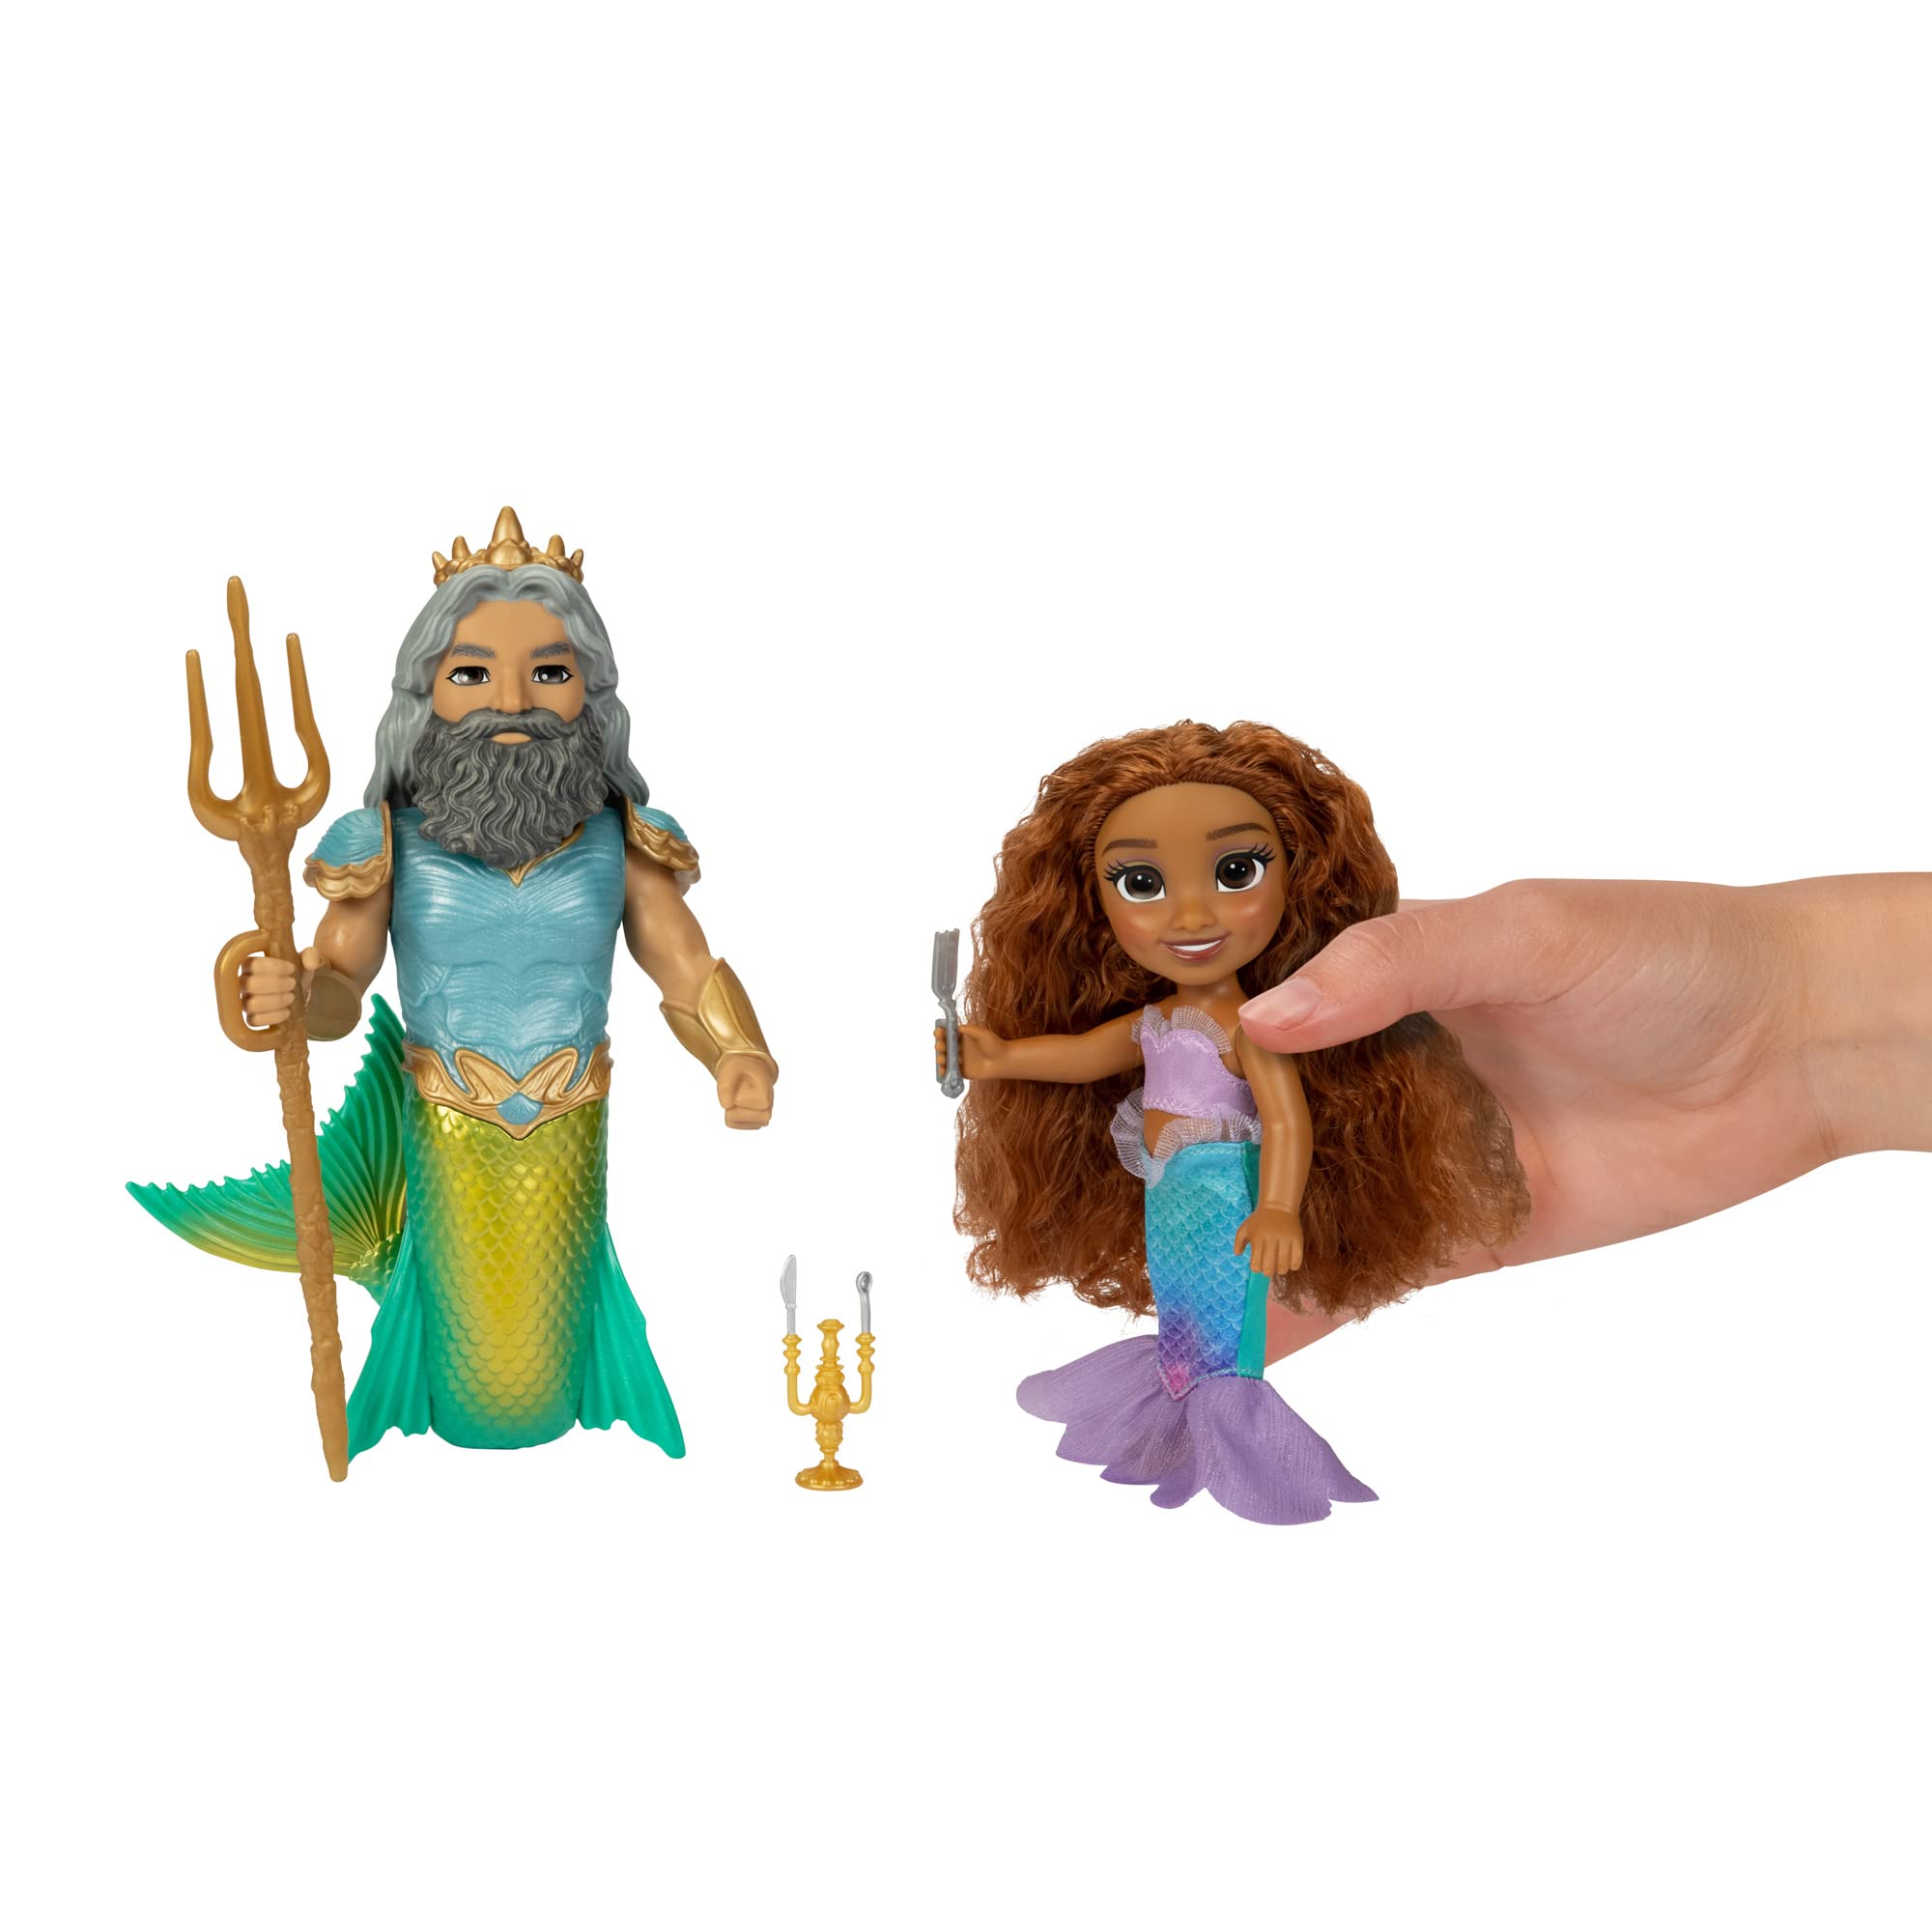 Disney The Little Mermaid Ariel Doll and King Triton Petite Gift Set, 6 Inches Tall with Dinglehopper, Candelabra and King Triton’s Trident Accessory Toys